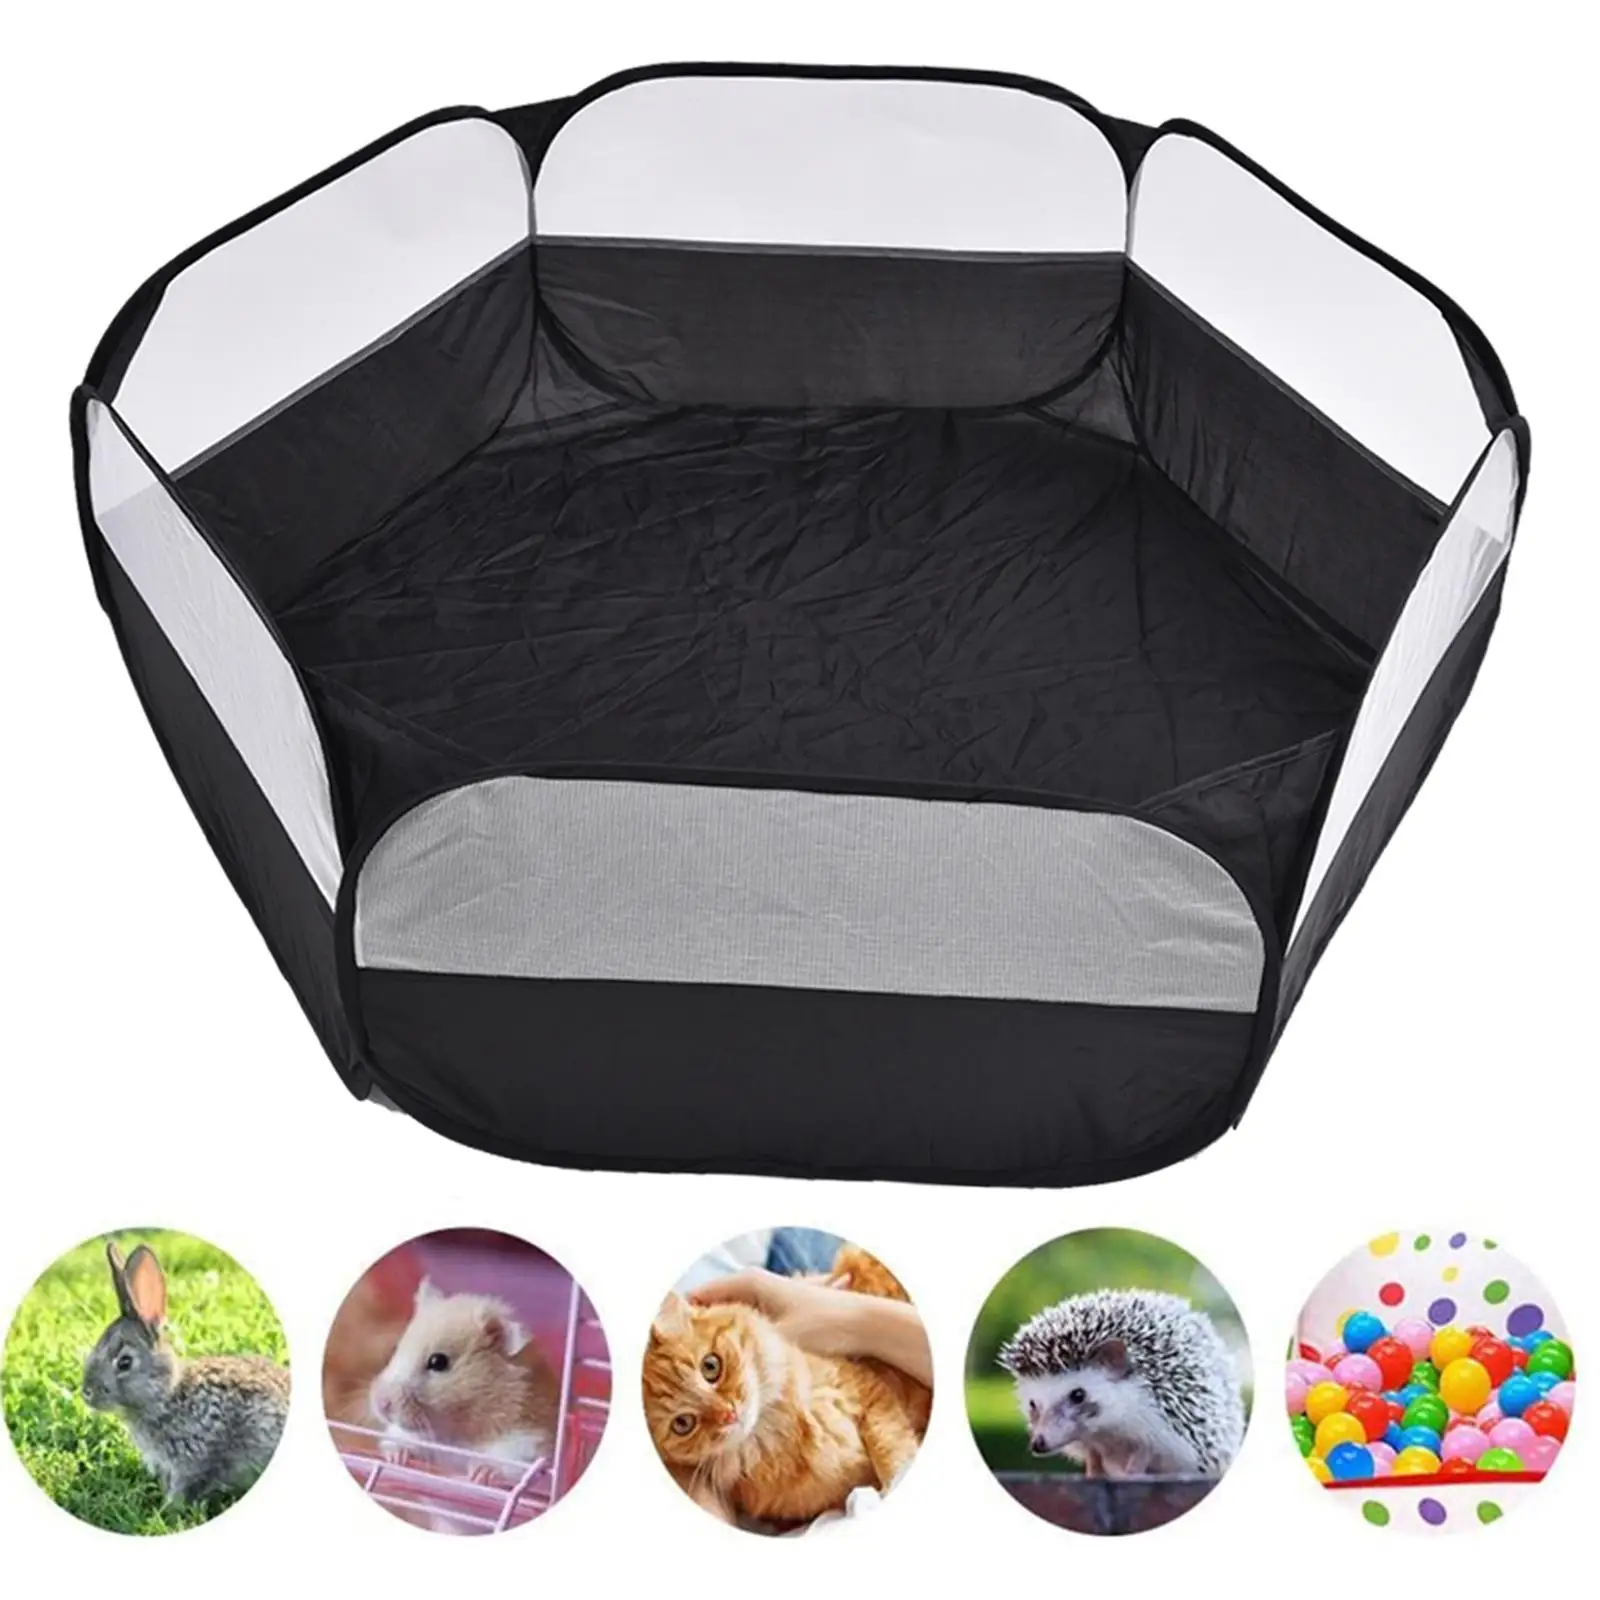 Pet Playpen Yard Fence Puppy Kennel Waterproof for Chinchilla Hamster Bunny Guinea Pig